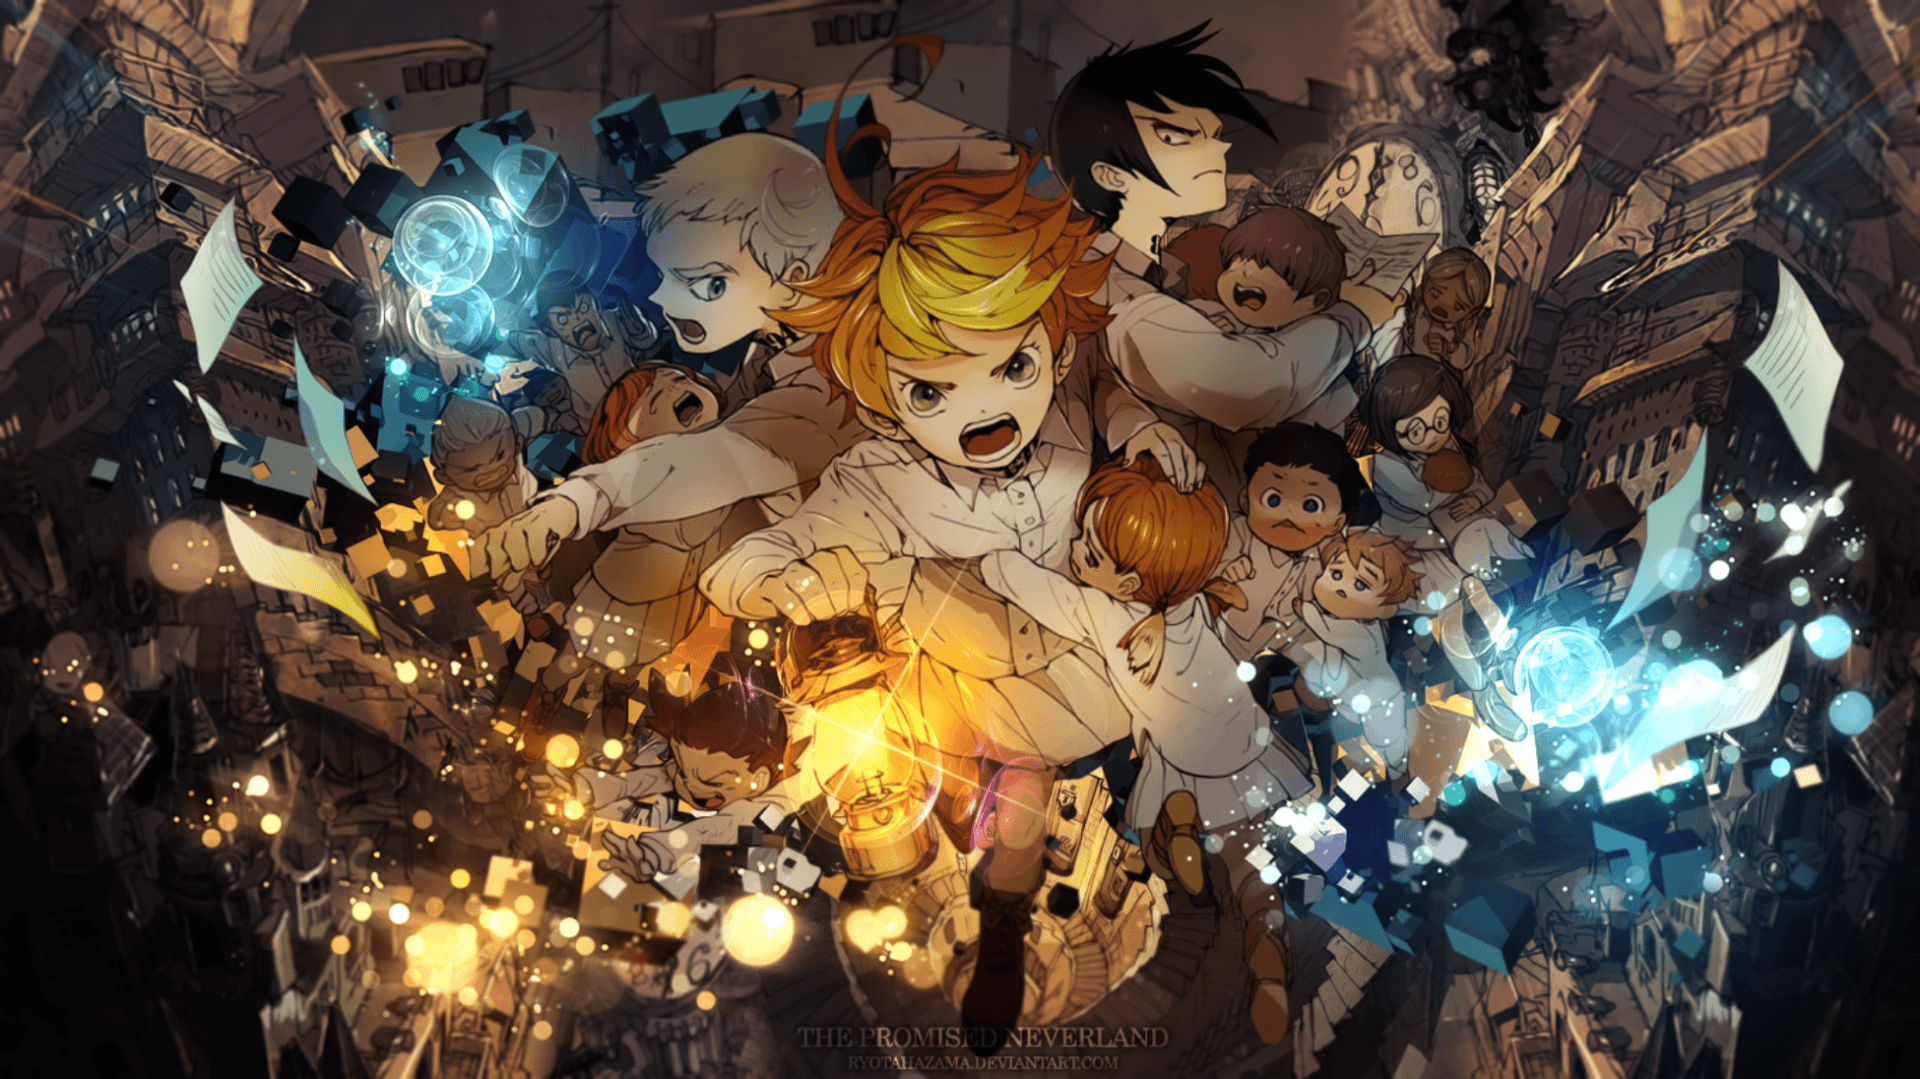 The Promised Neverland Background Image and Wallpaper